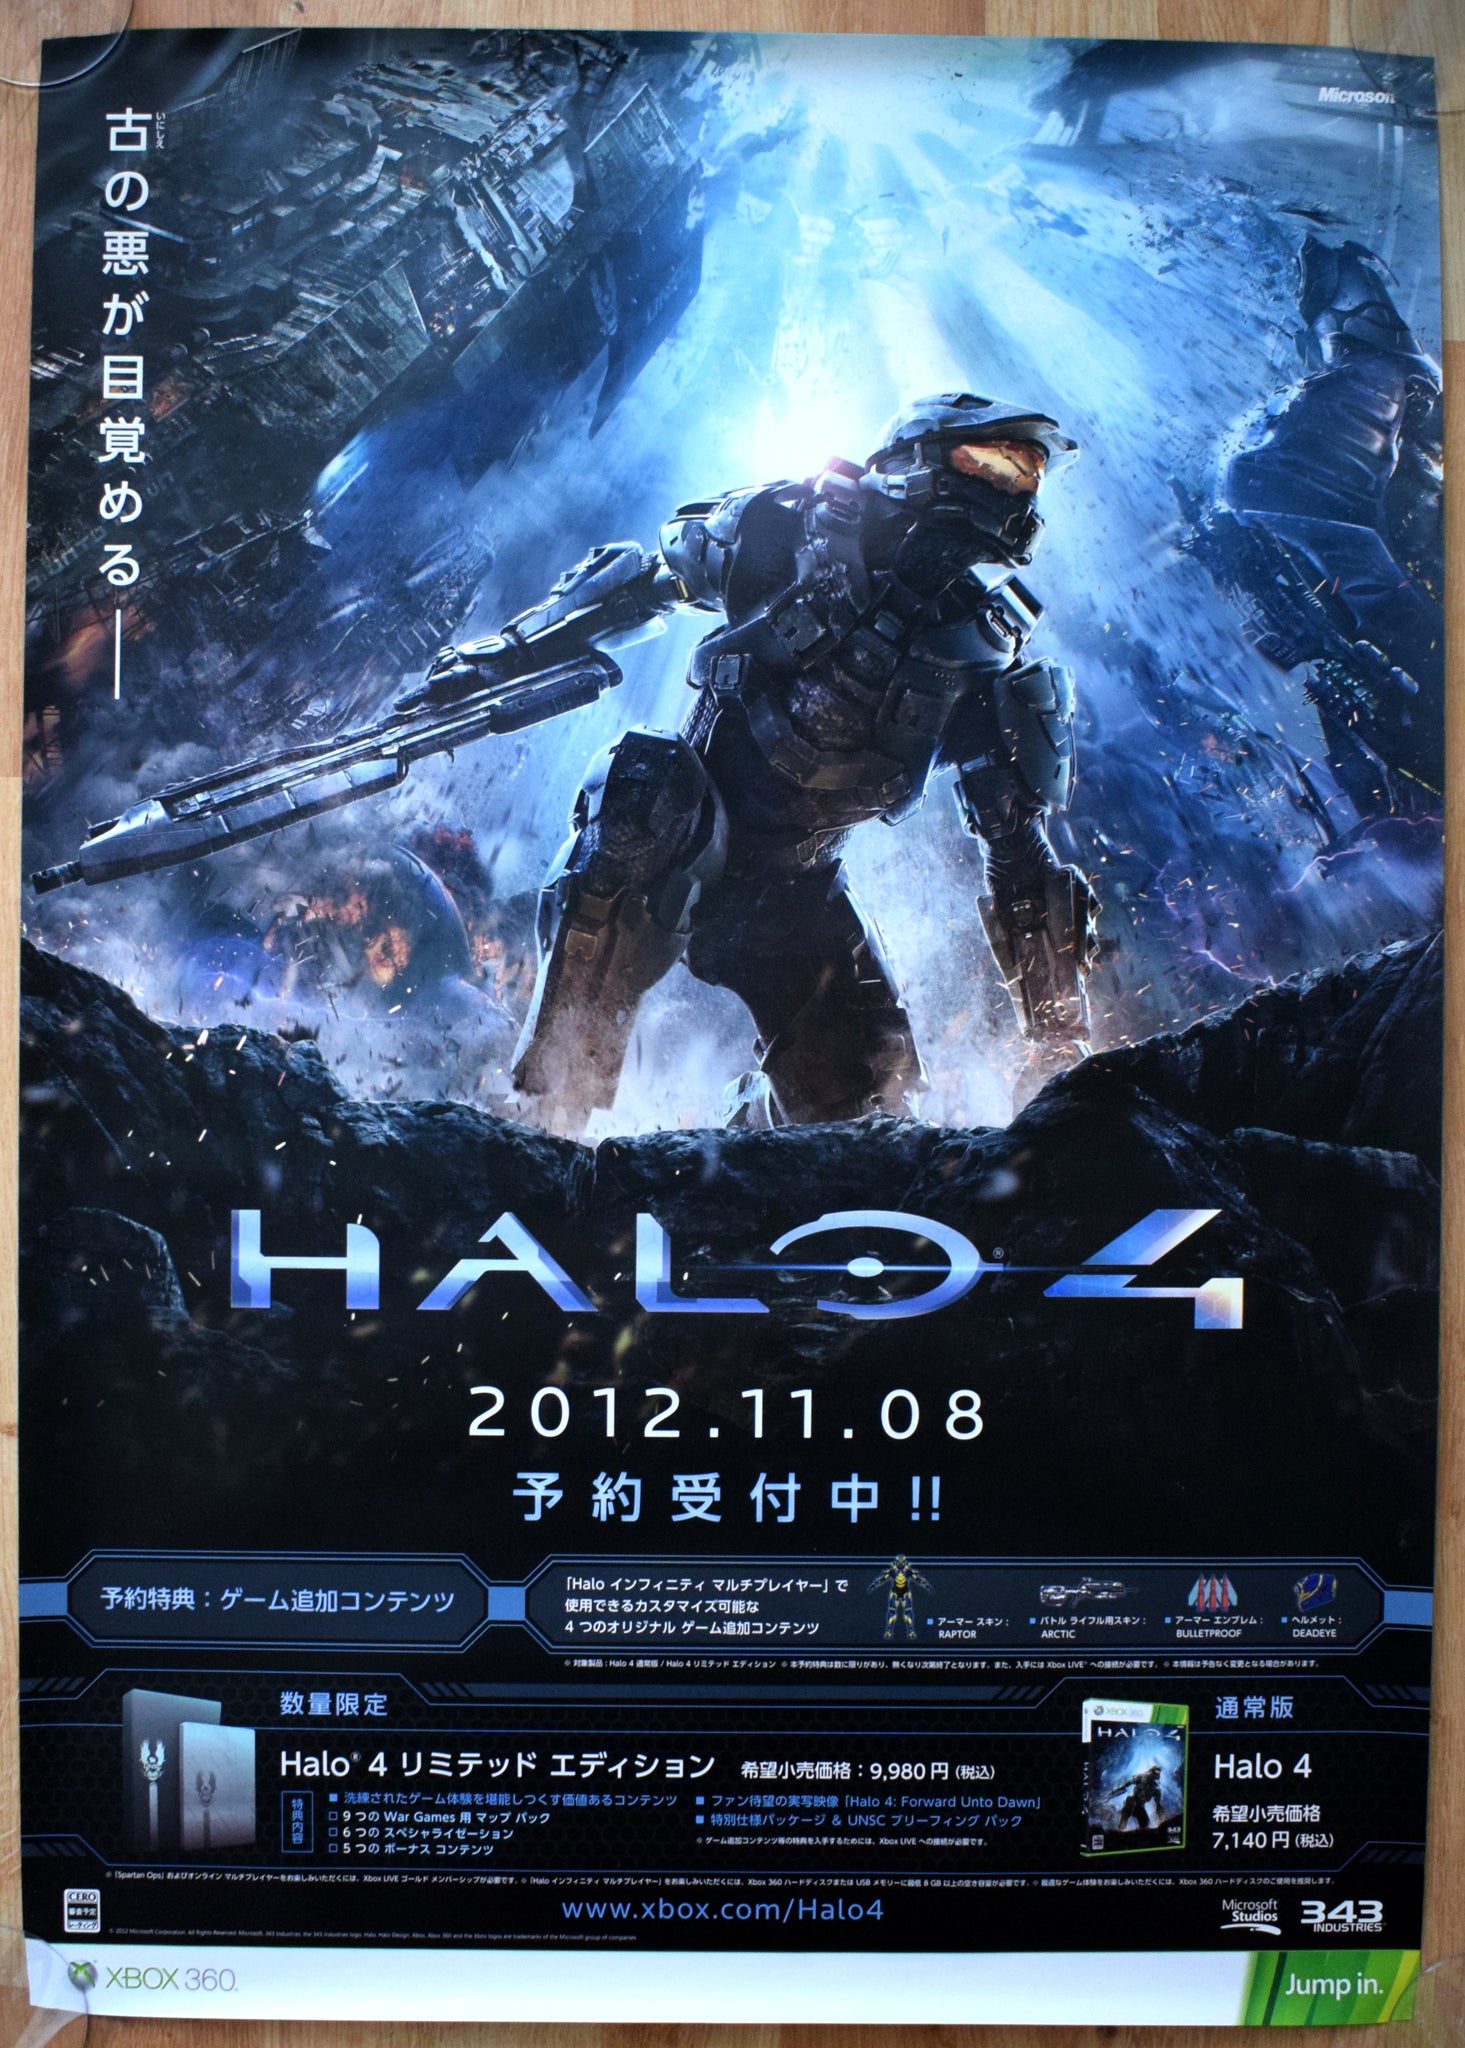 Halo 4 (B2) Japanese Promotional Poster #3